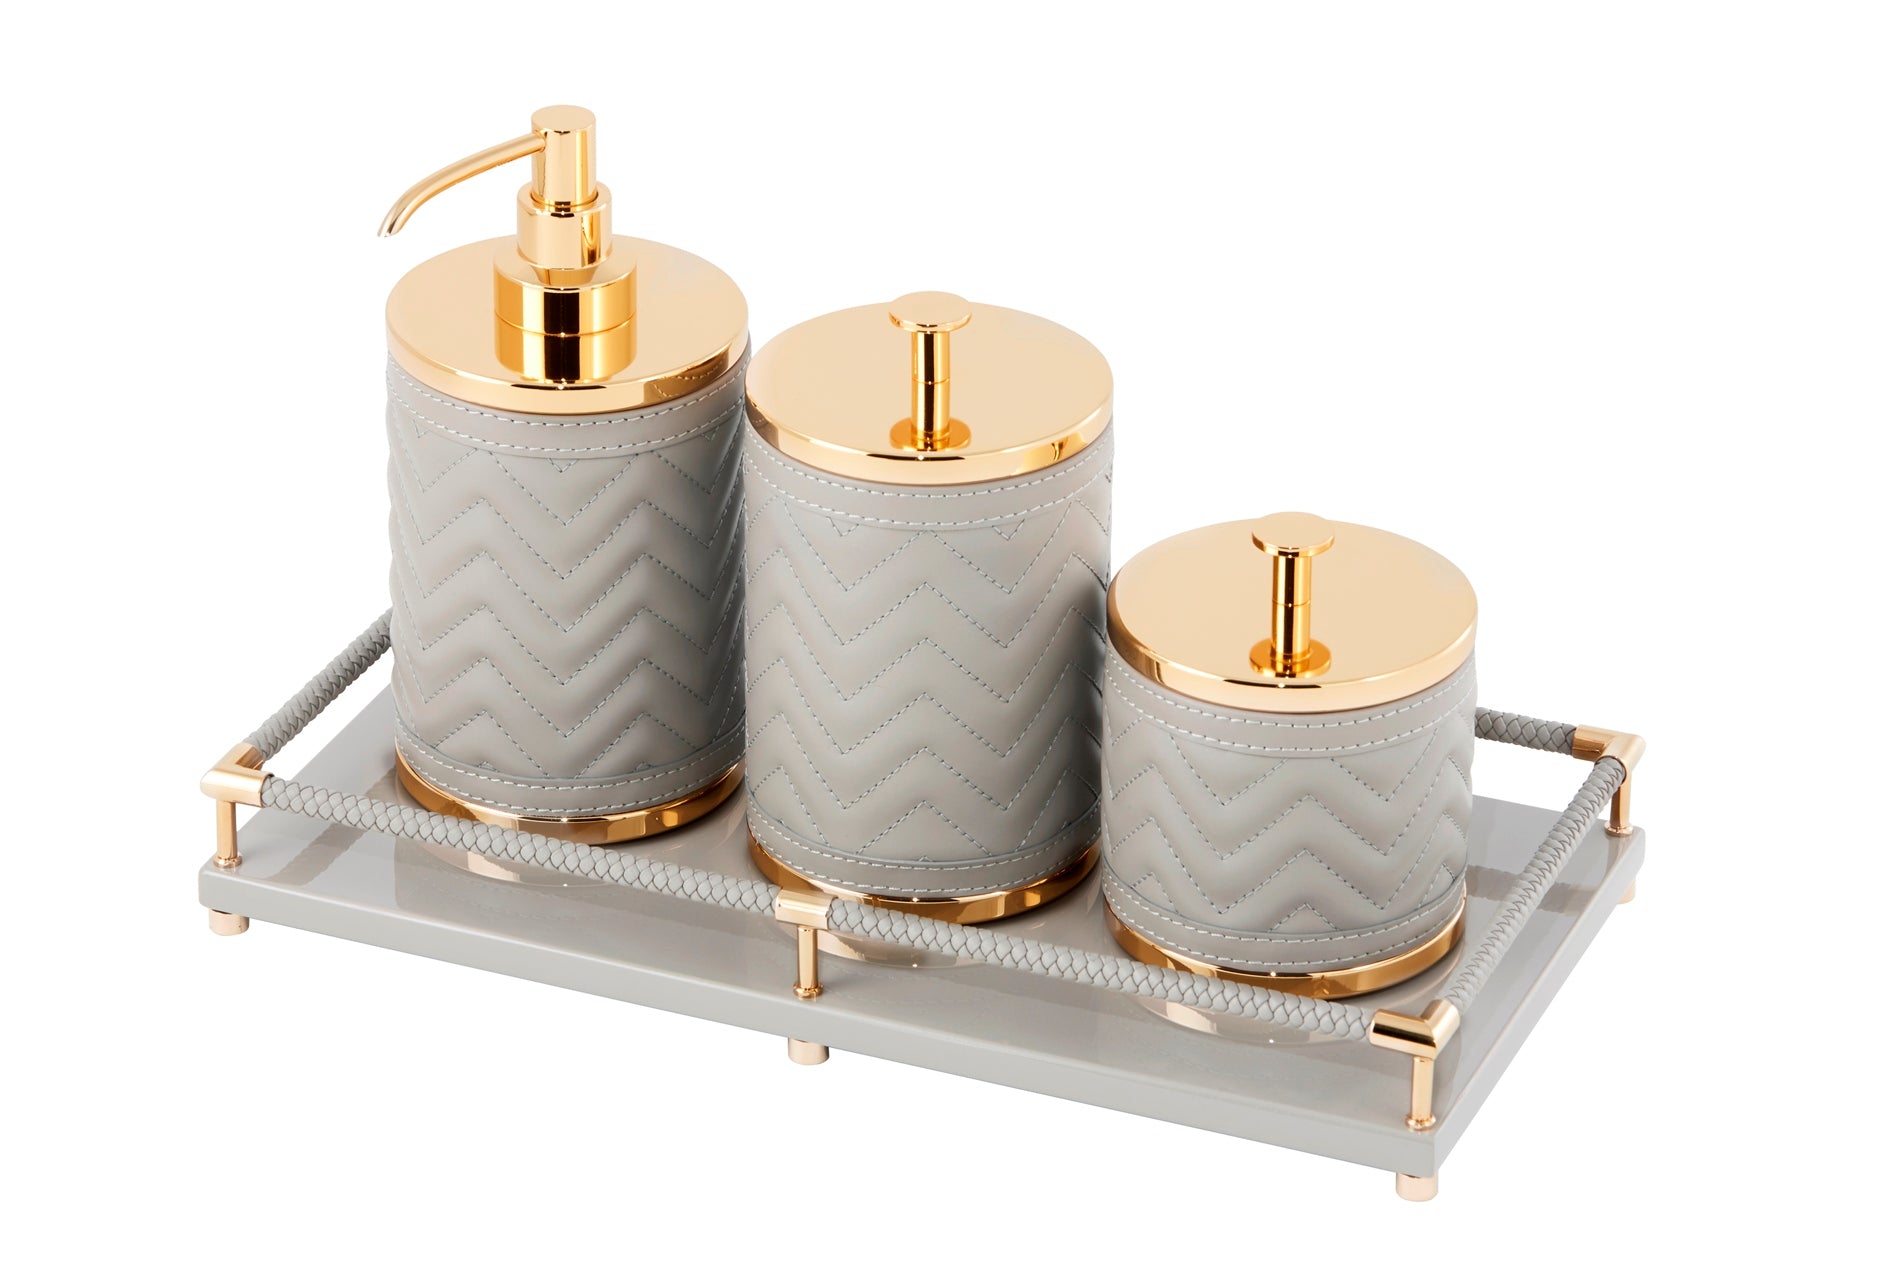 Riviere Alghero Quilted Herringbone Box | Covered with Quilted Herringbone Padded Leather | Features Chrome or Gold Metal Finish | Adds Elegance to Bathrooms